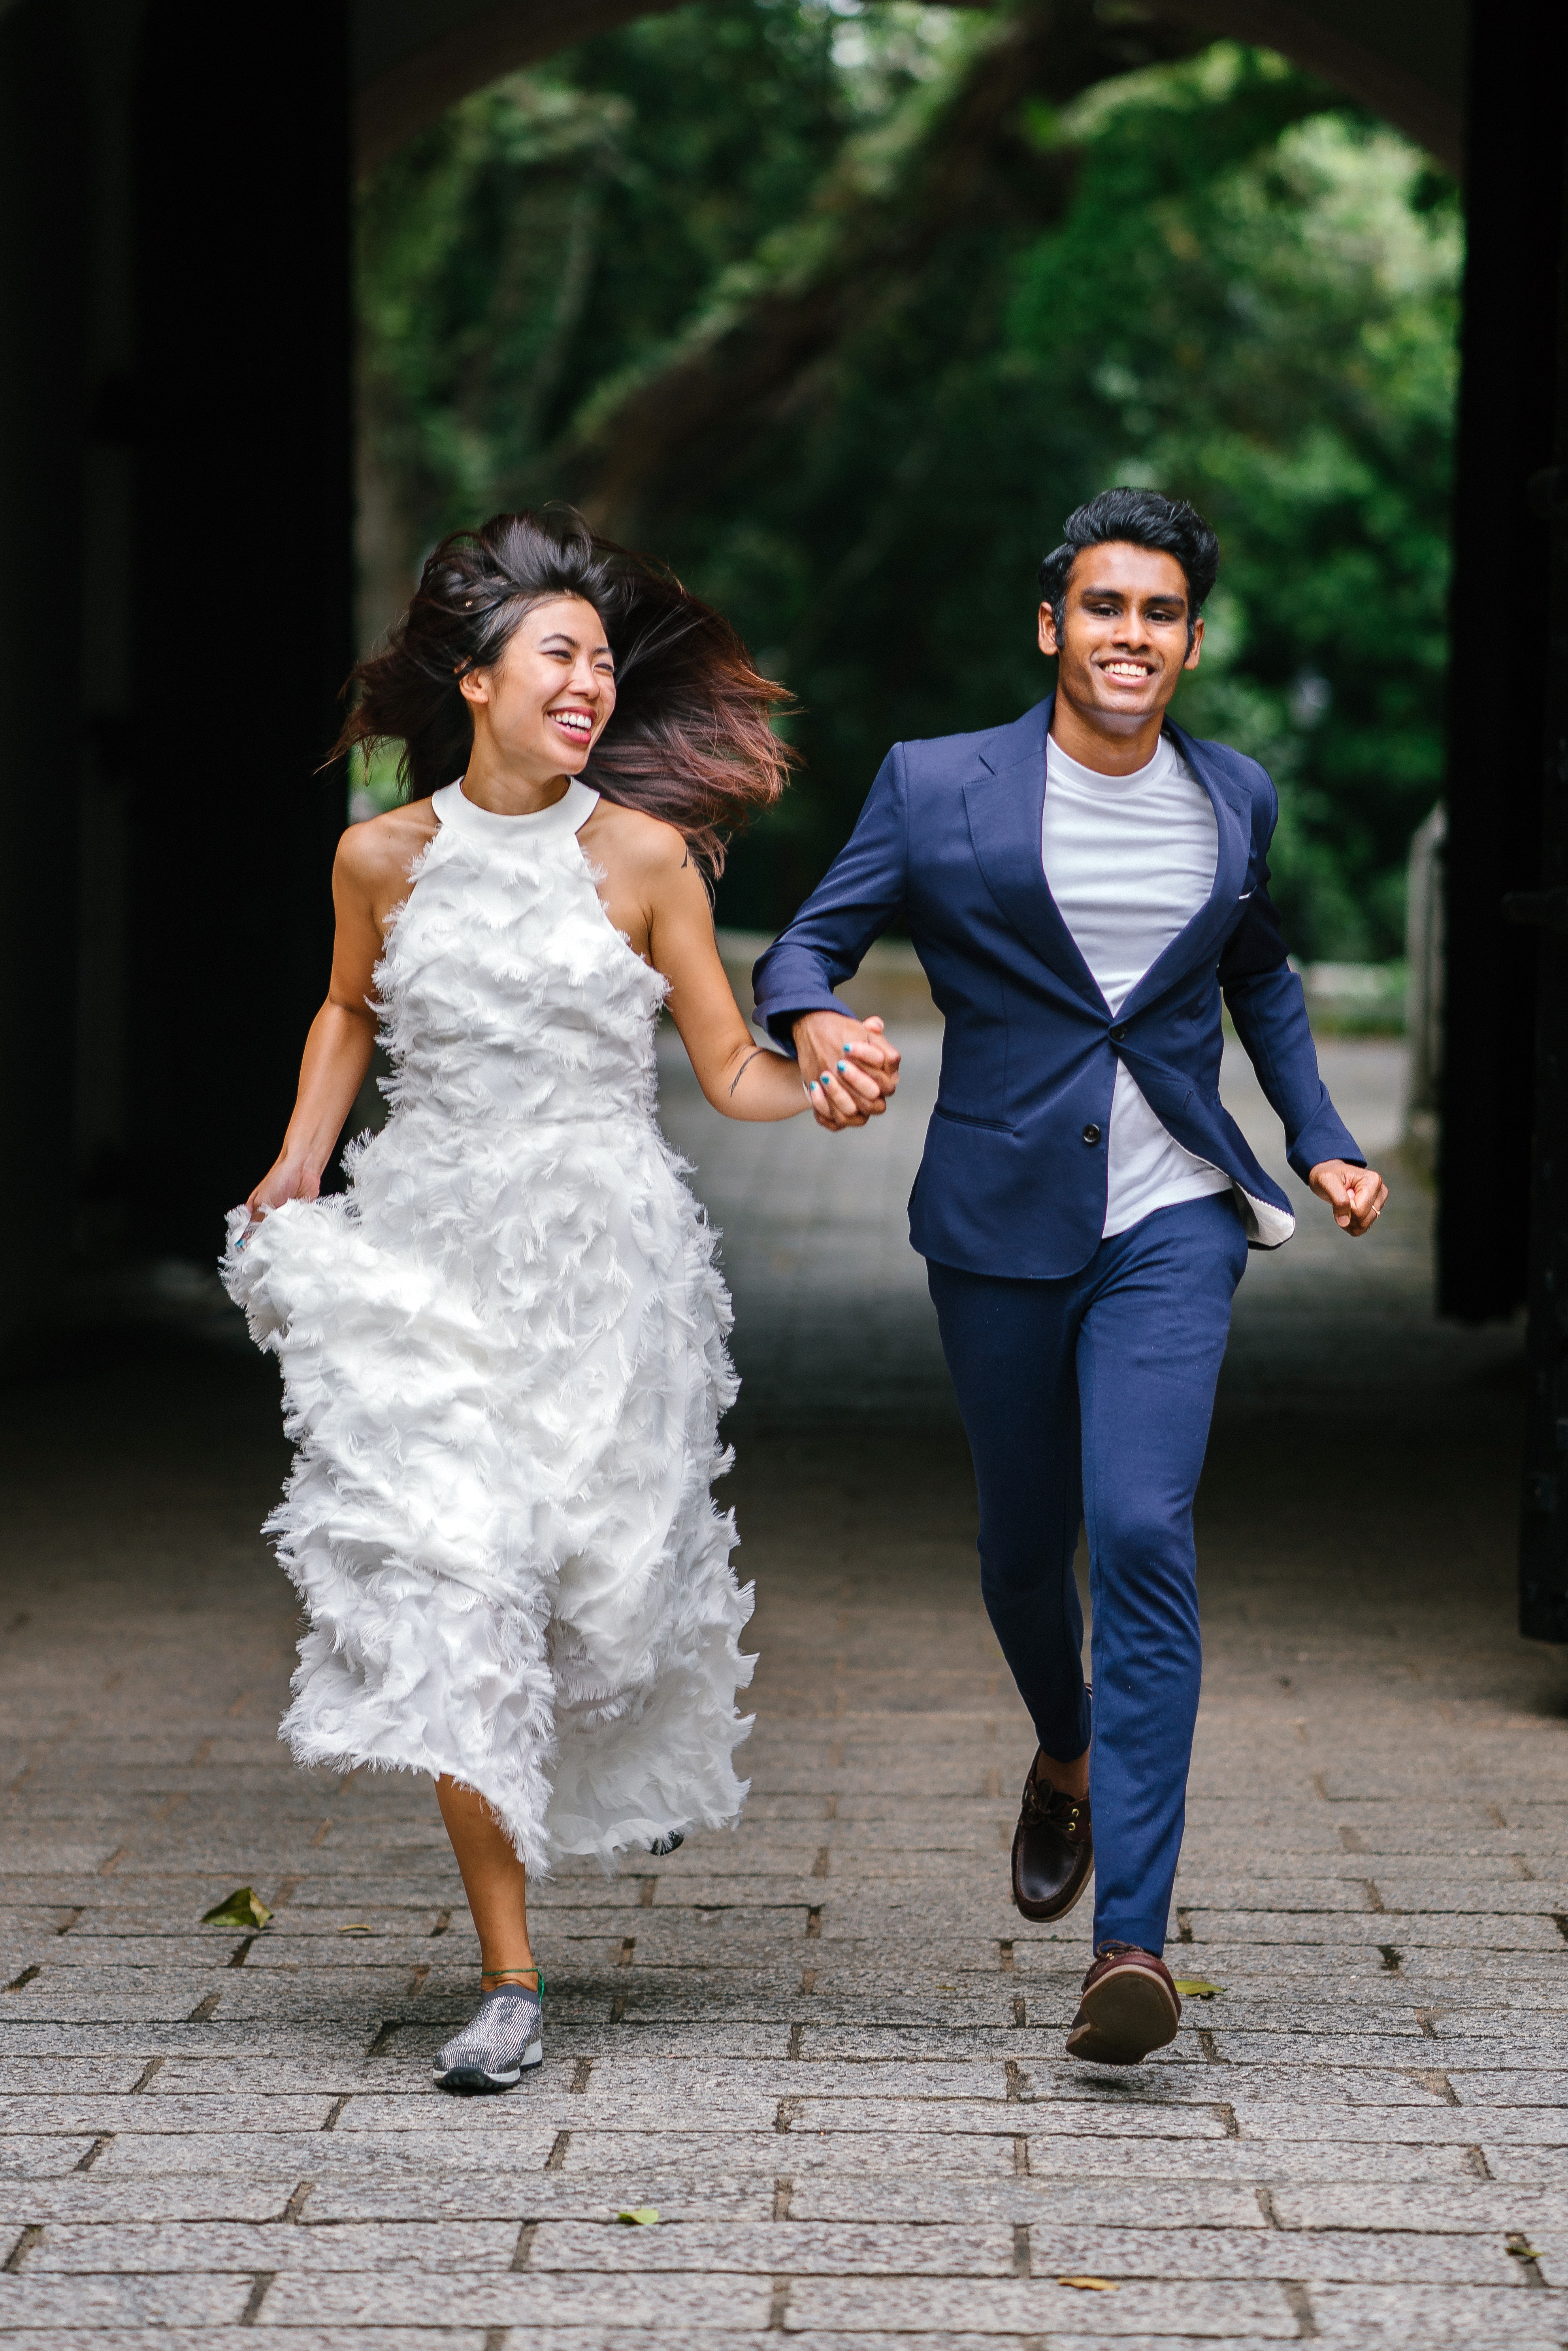 Bride and Groom Running on Concrete Pathway, Asian, Sunlight, Park, People, HQ Photo